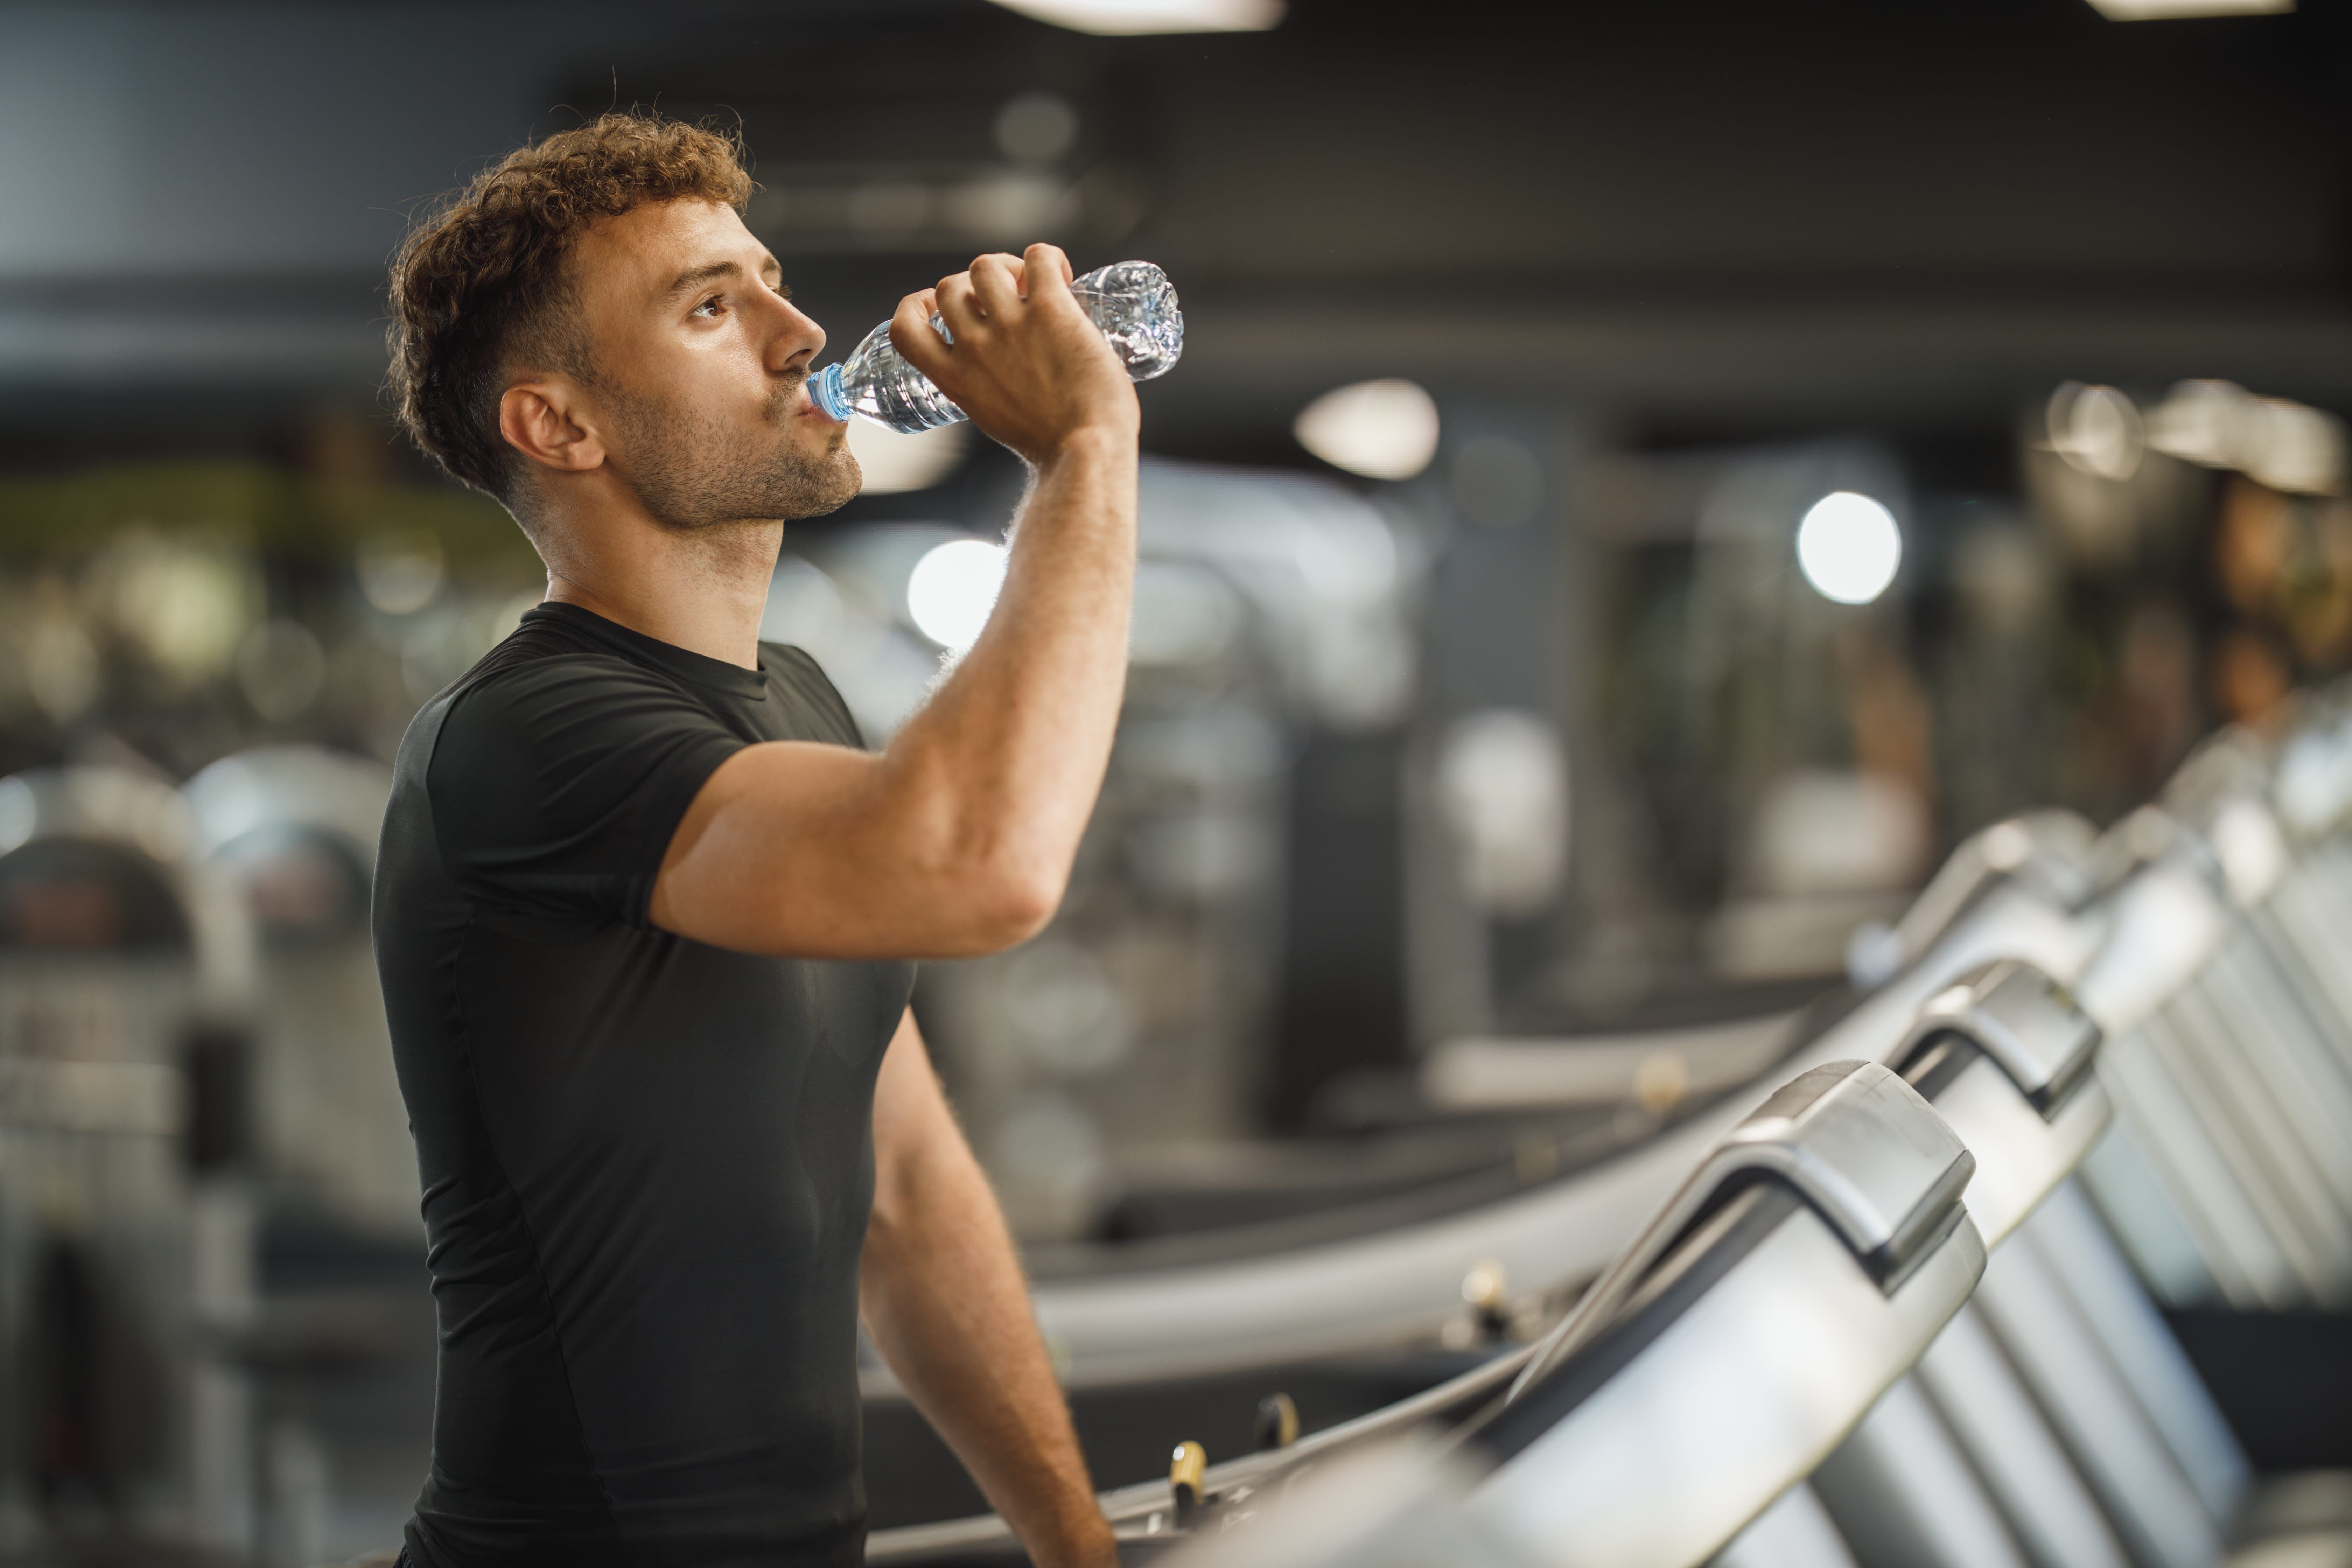 Image of man drinking water while on treadmill